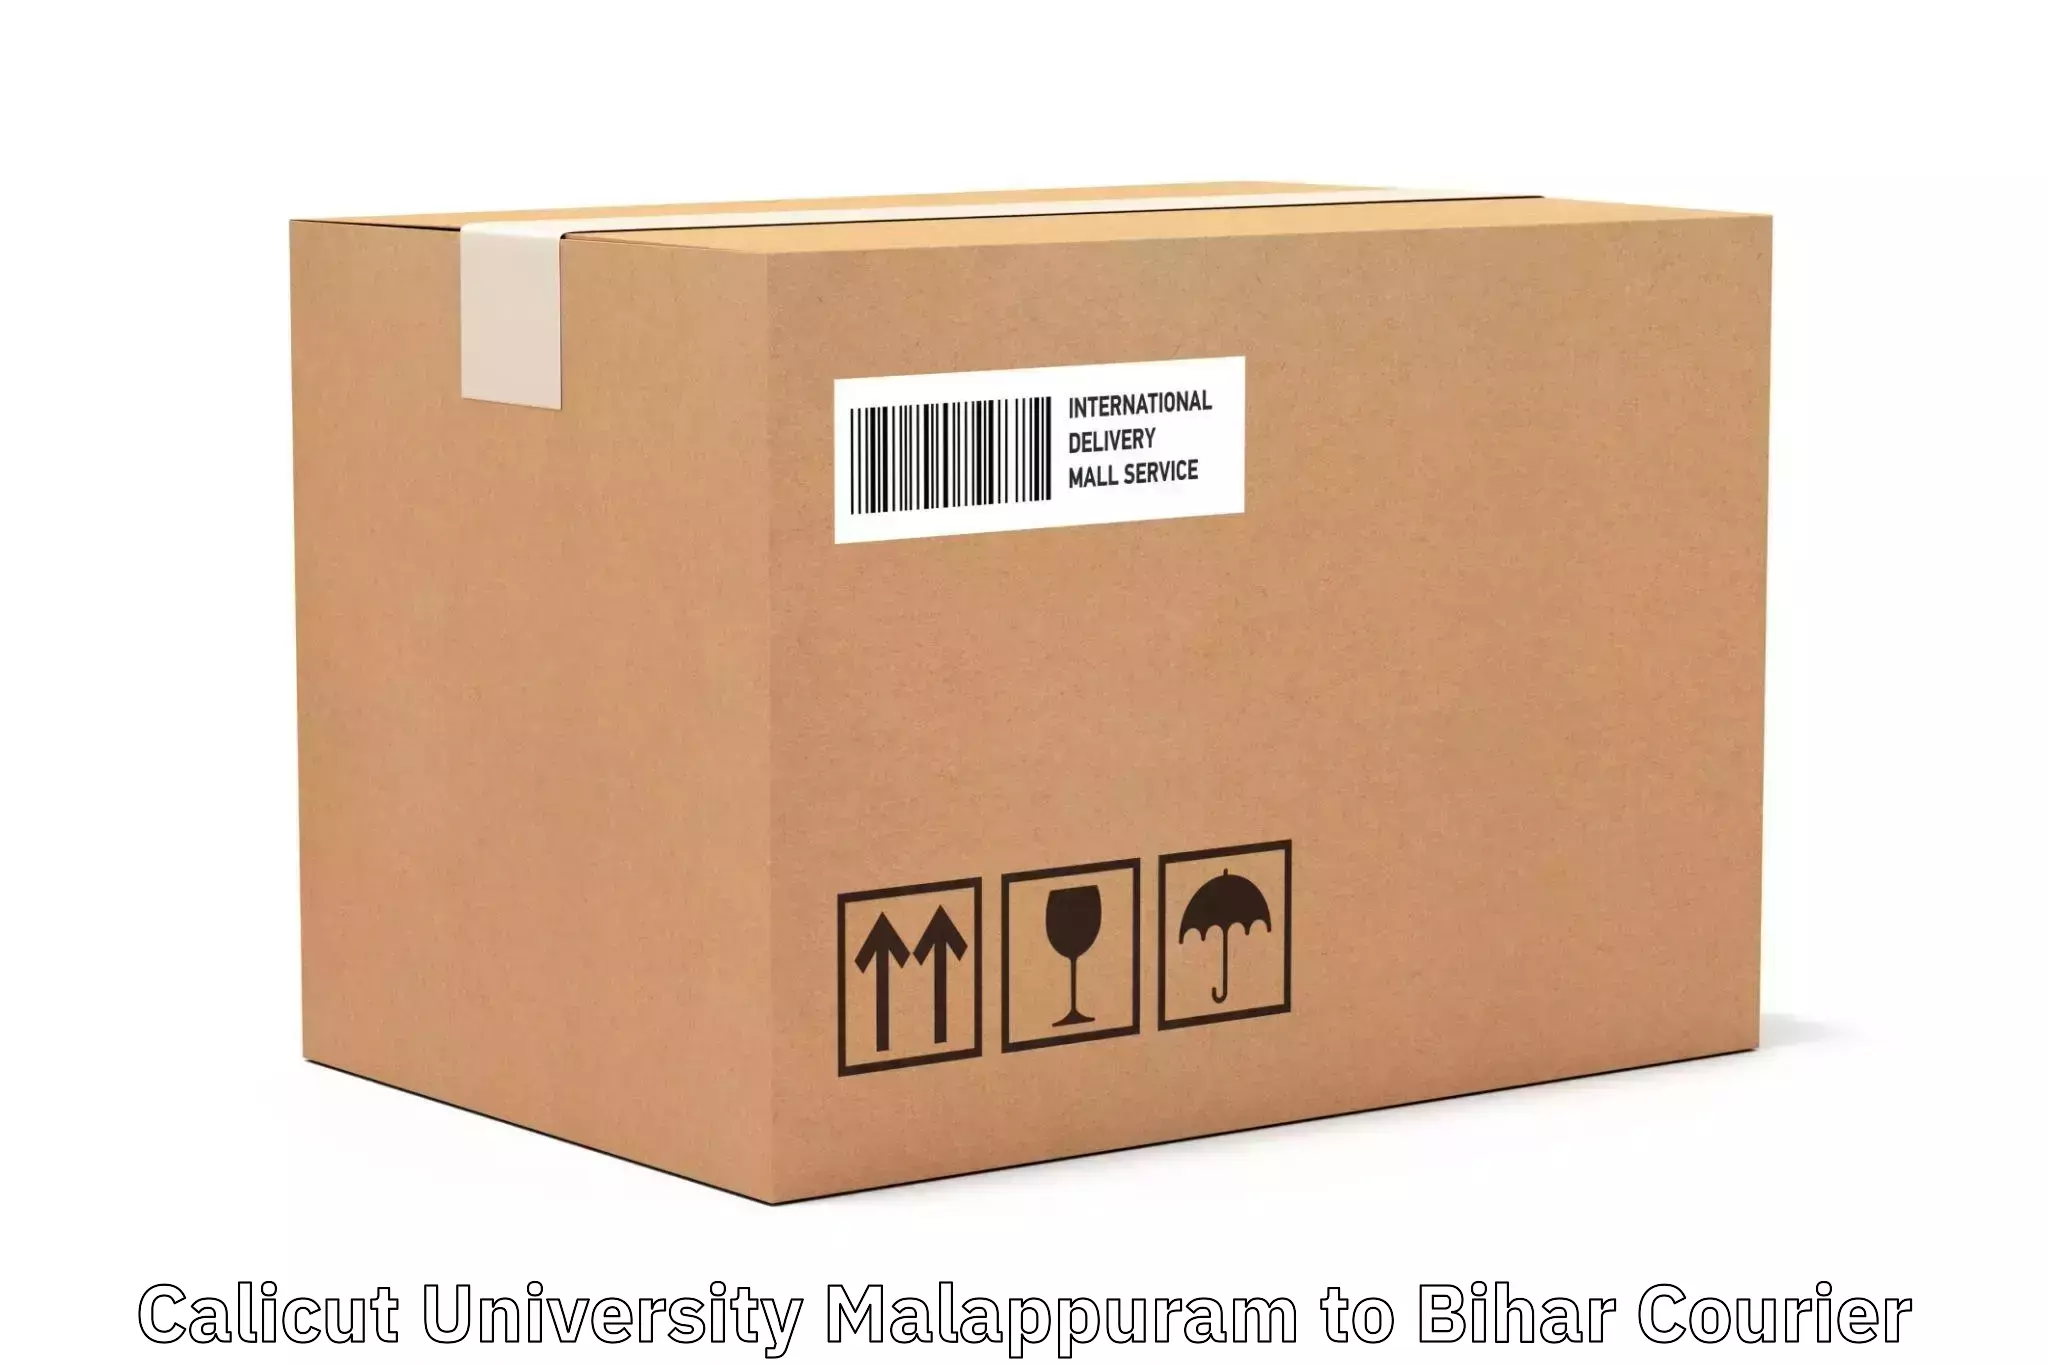 Fastest parcel delivery Calicut University Malappuram to Chainpur